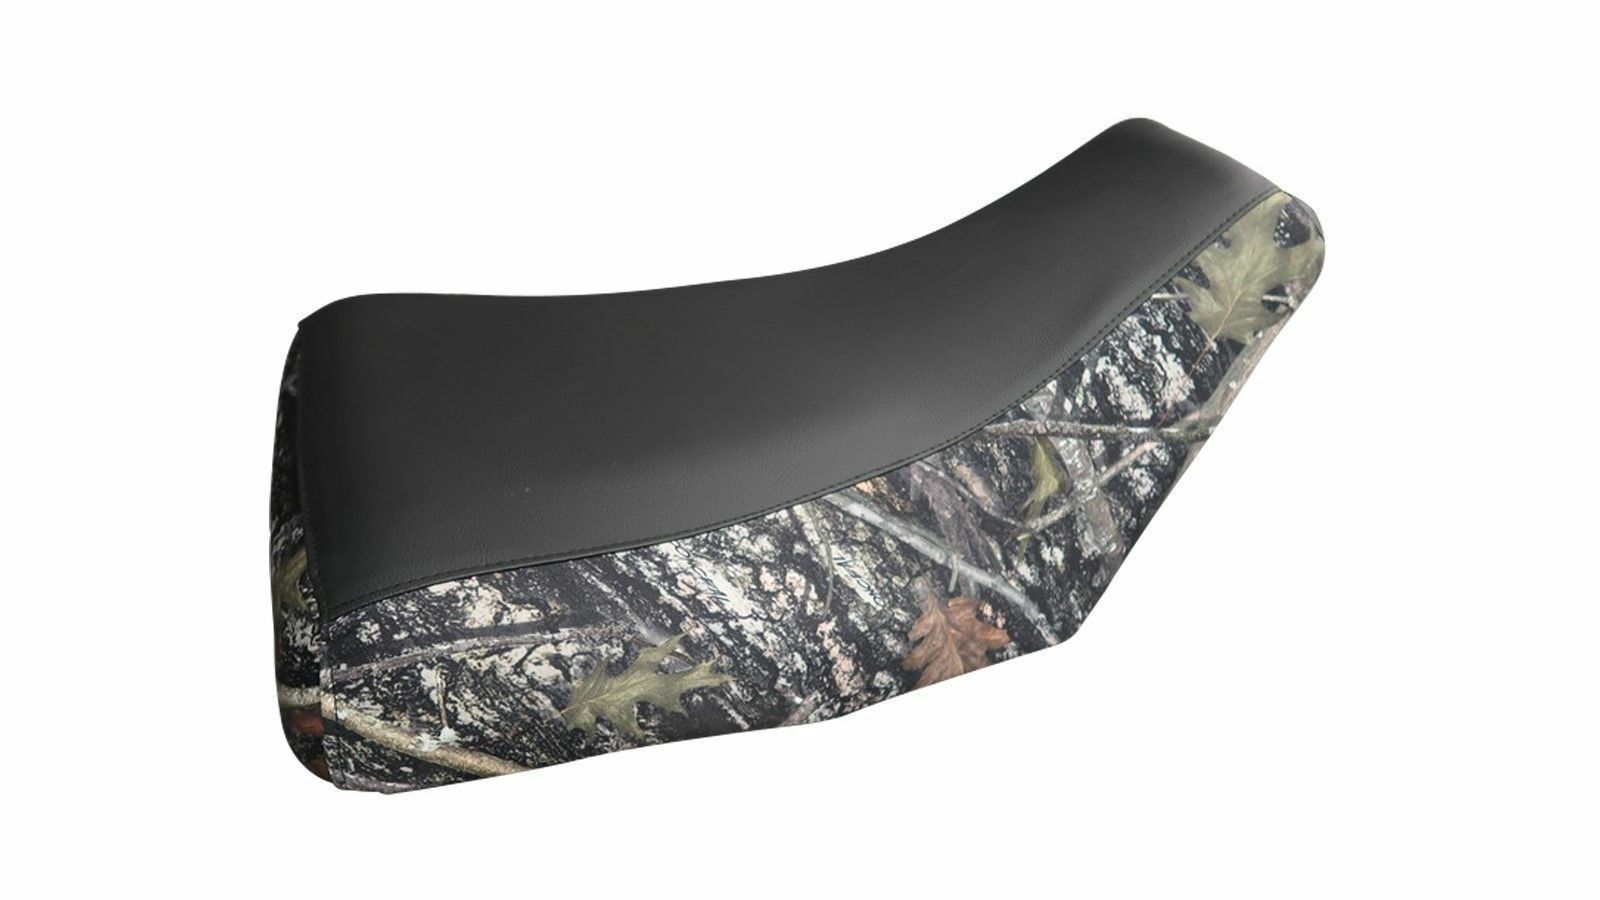 Primary image for For Honda Rubicon 500 Seat Cover 2001 To 2004 Camo Sides Black Top TG20187186